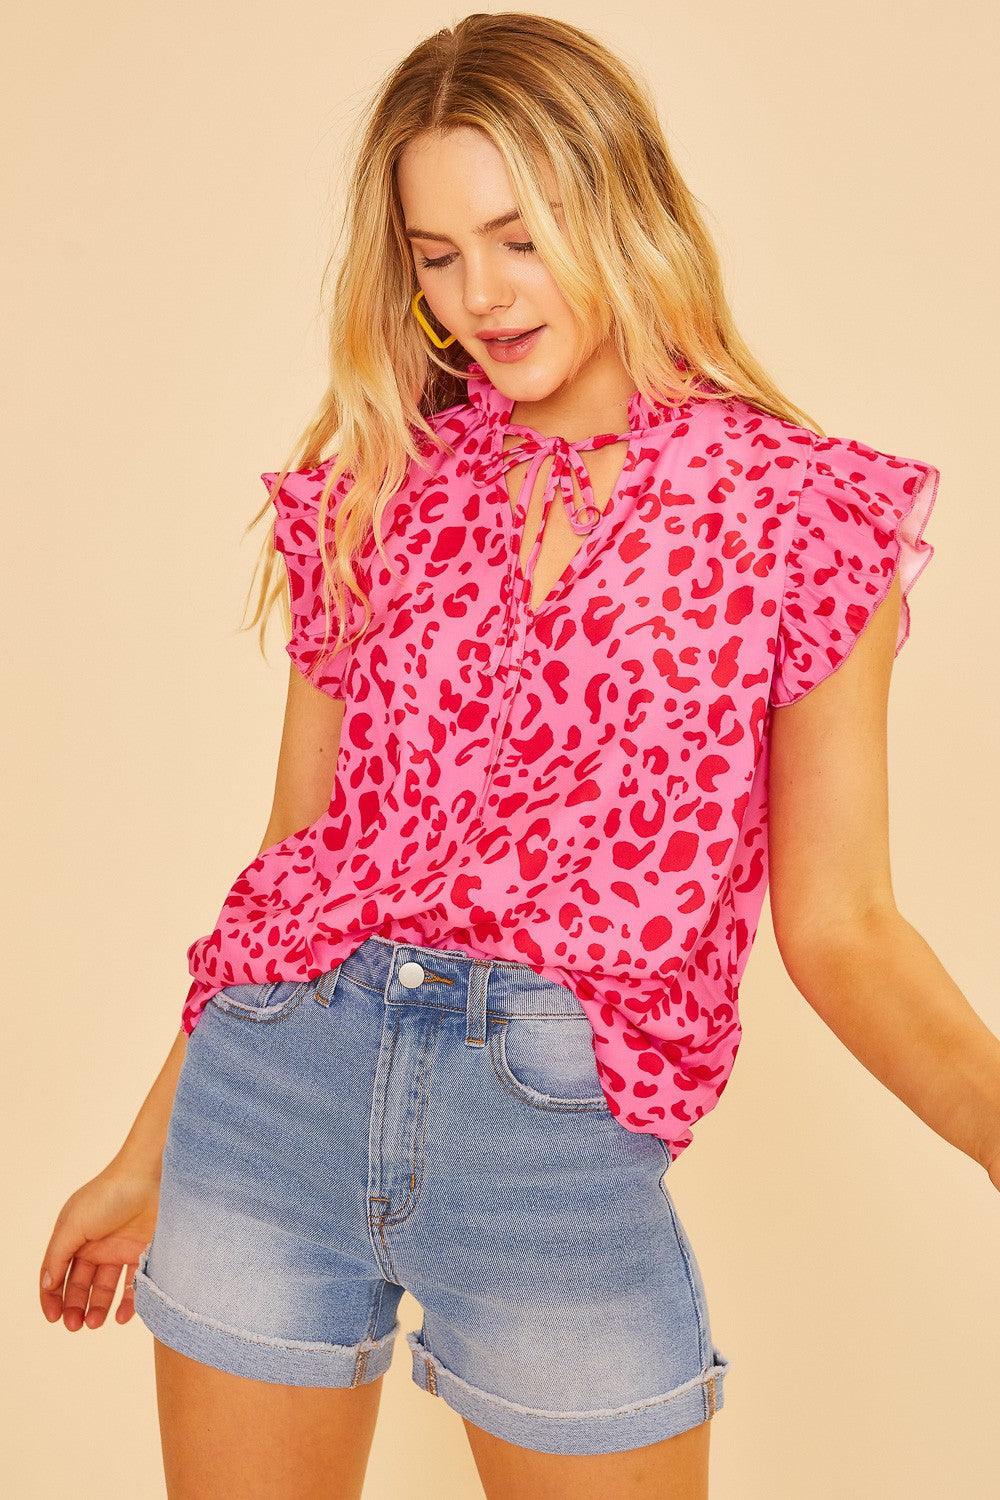 Strawberry Leopard Top - Lady Dorothy Boutique